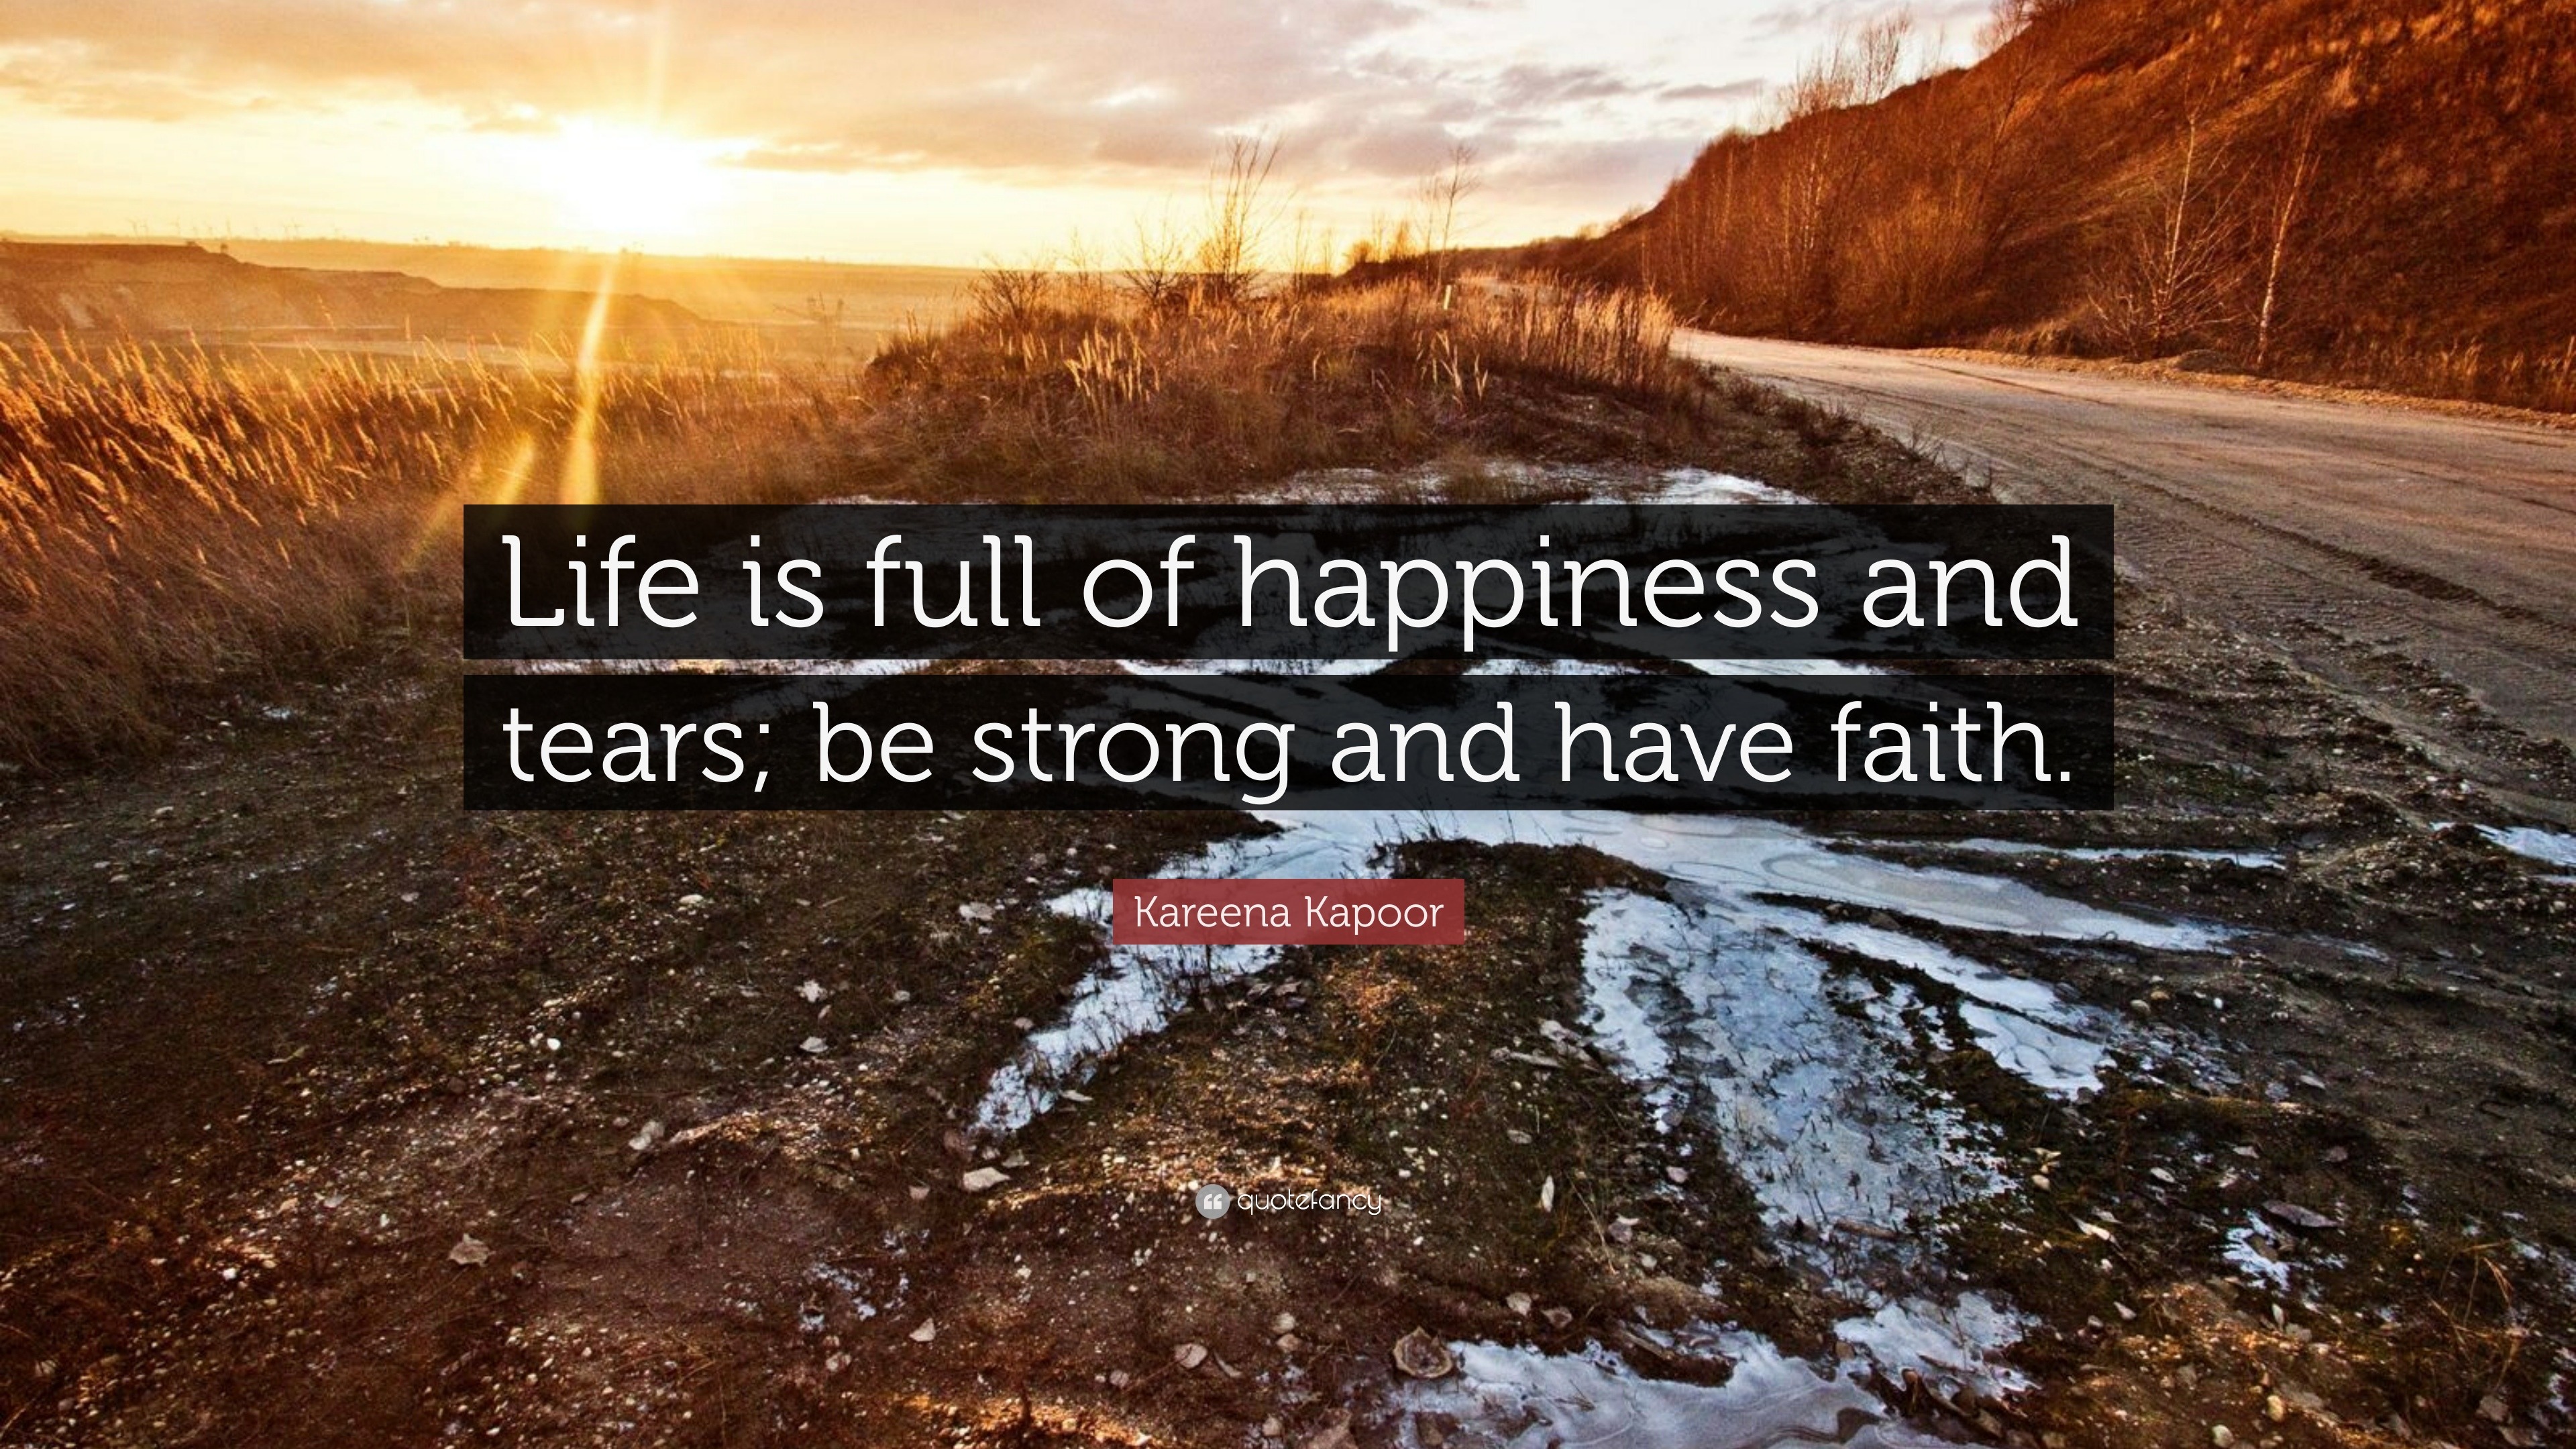 good quotes on life and happiness